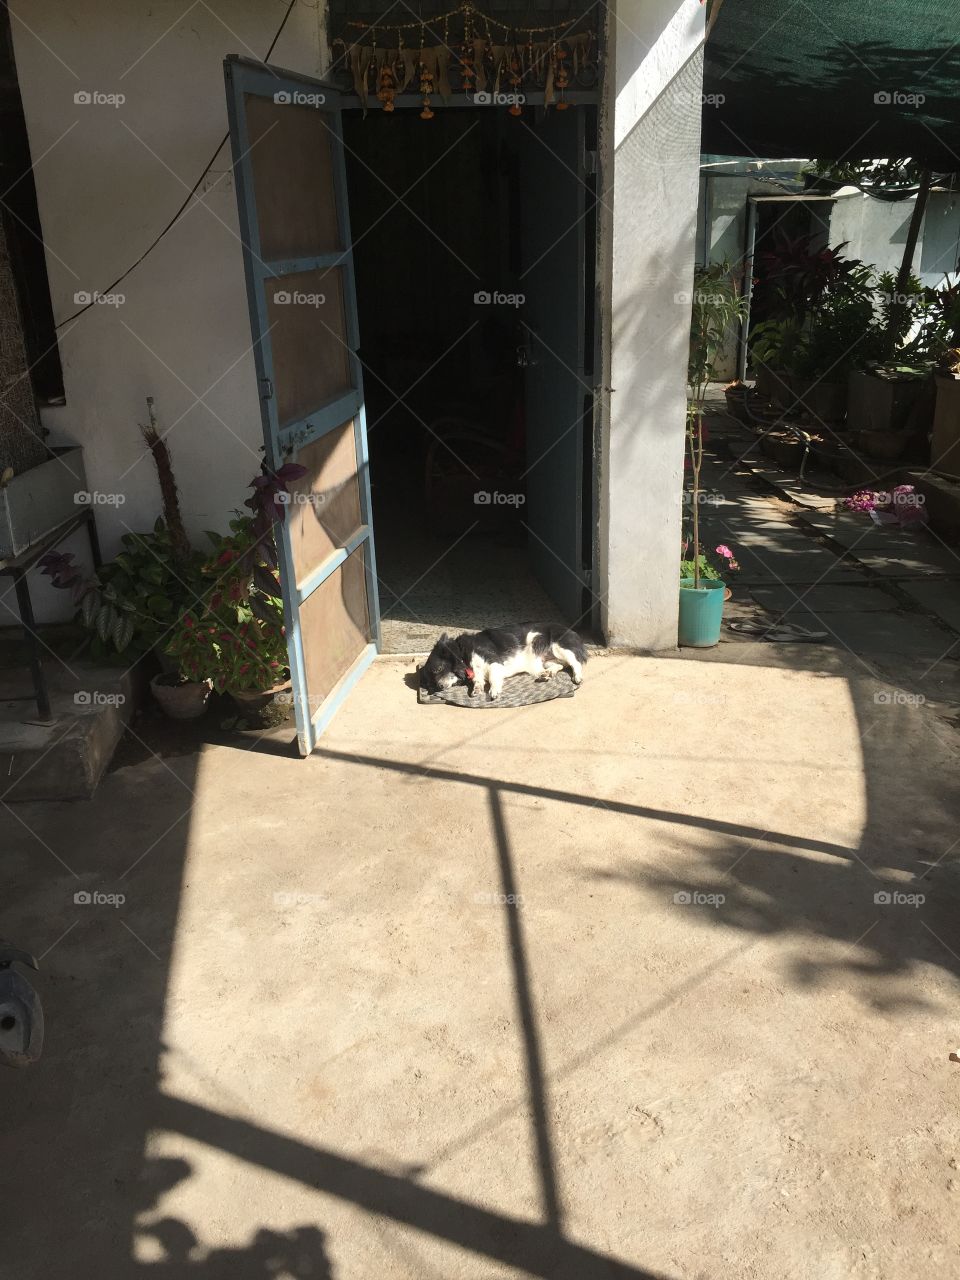 This little girl always waits for me at this day i had night shift and when i arrived i saw this- taking nap in summer and waiting for me "I thing we don't deserve their love "  all animals live their live for short period so instead of throwing stones at them we should love them 